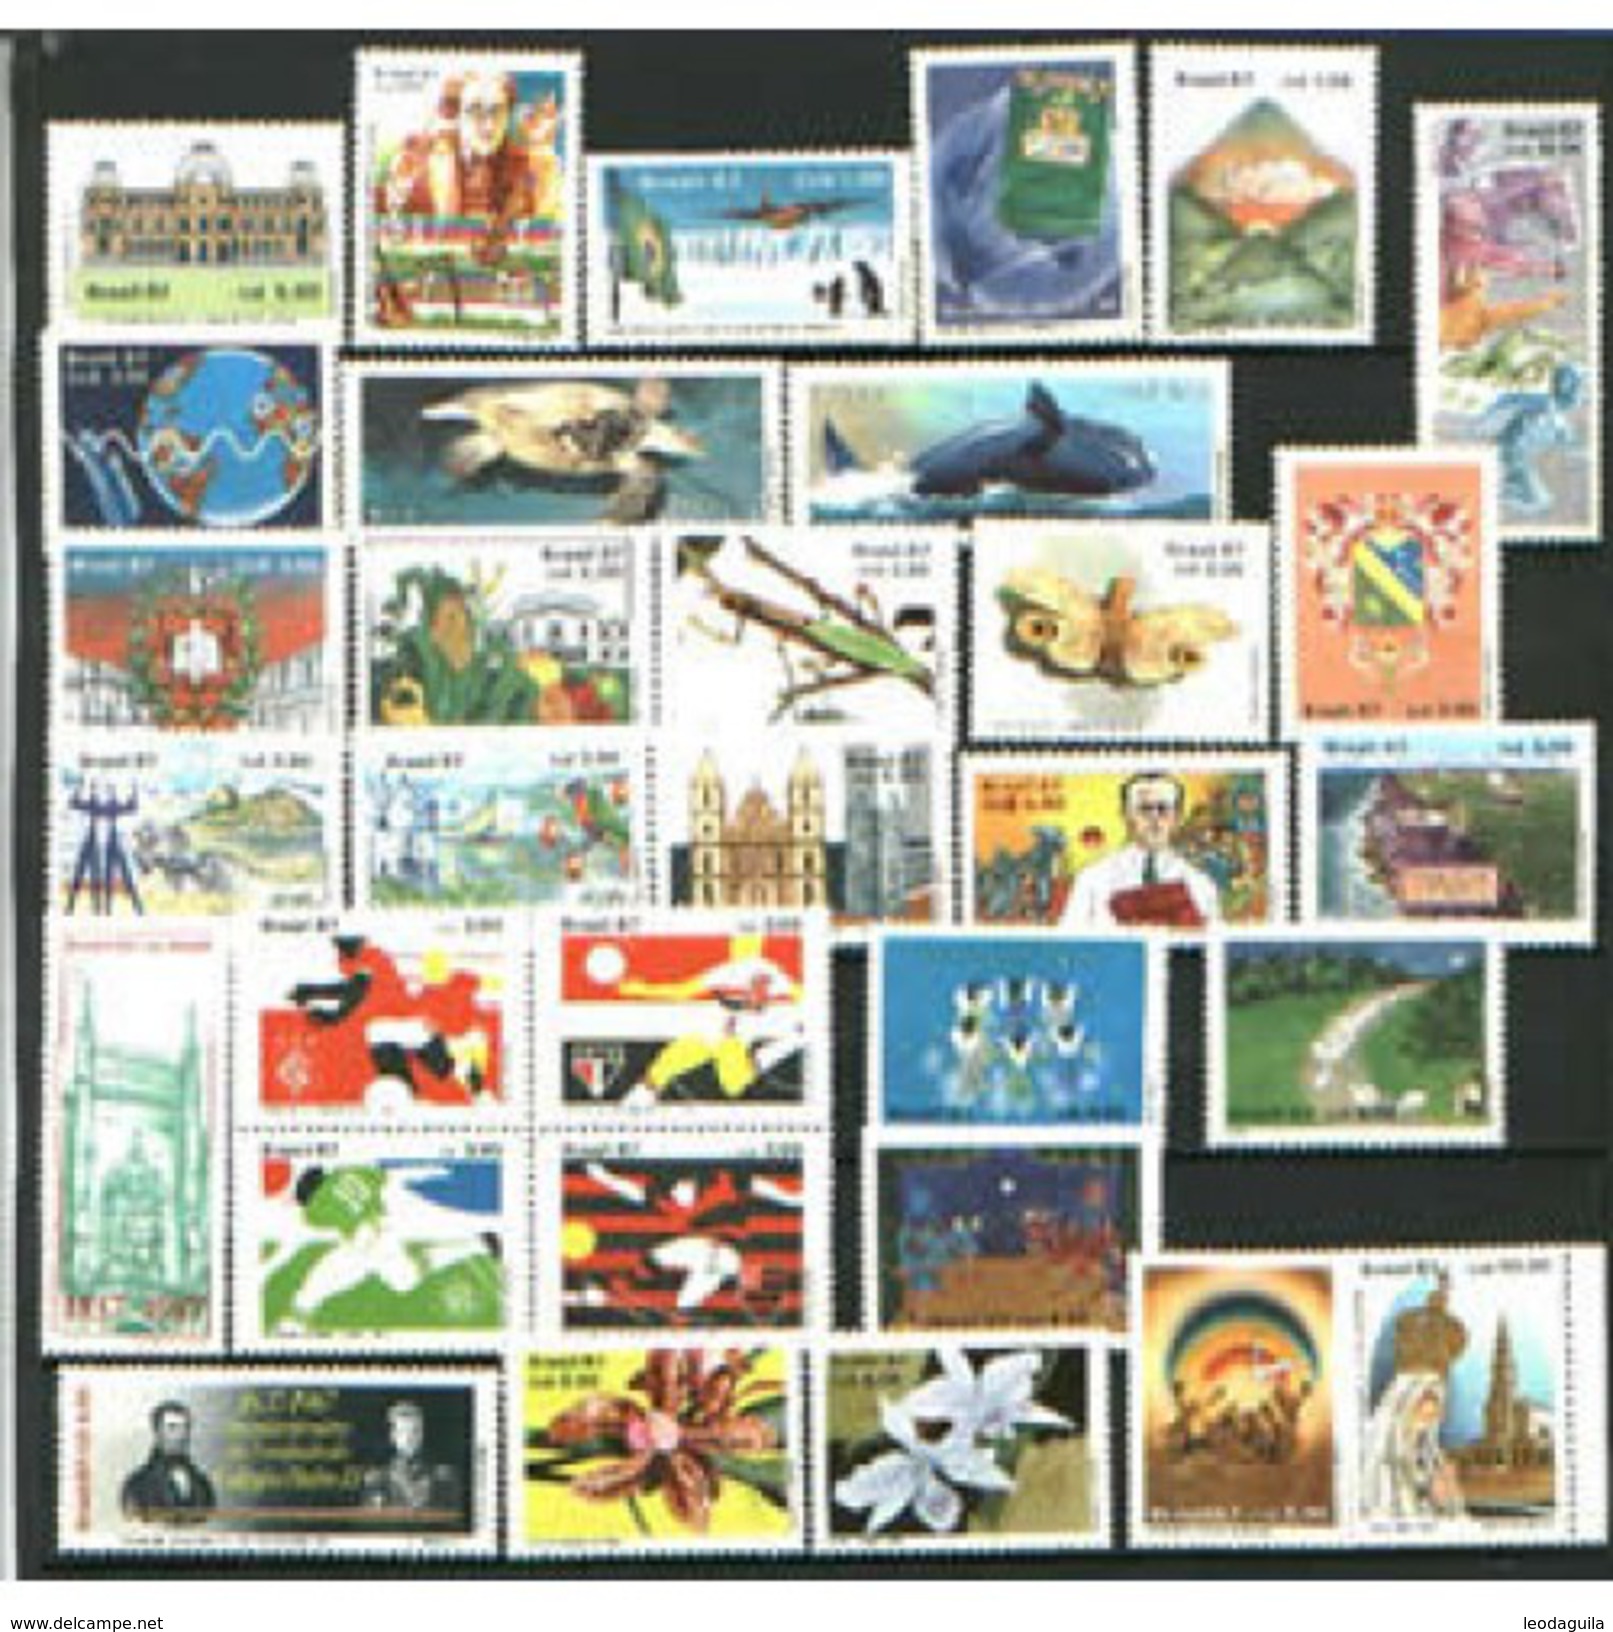 BRAZIL 1987 - YEAR COLLECTION - COMMEMORATIVES STAMPS - MNH - Annate Complete